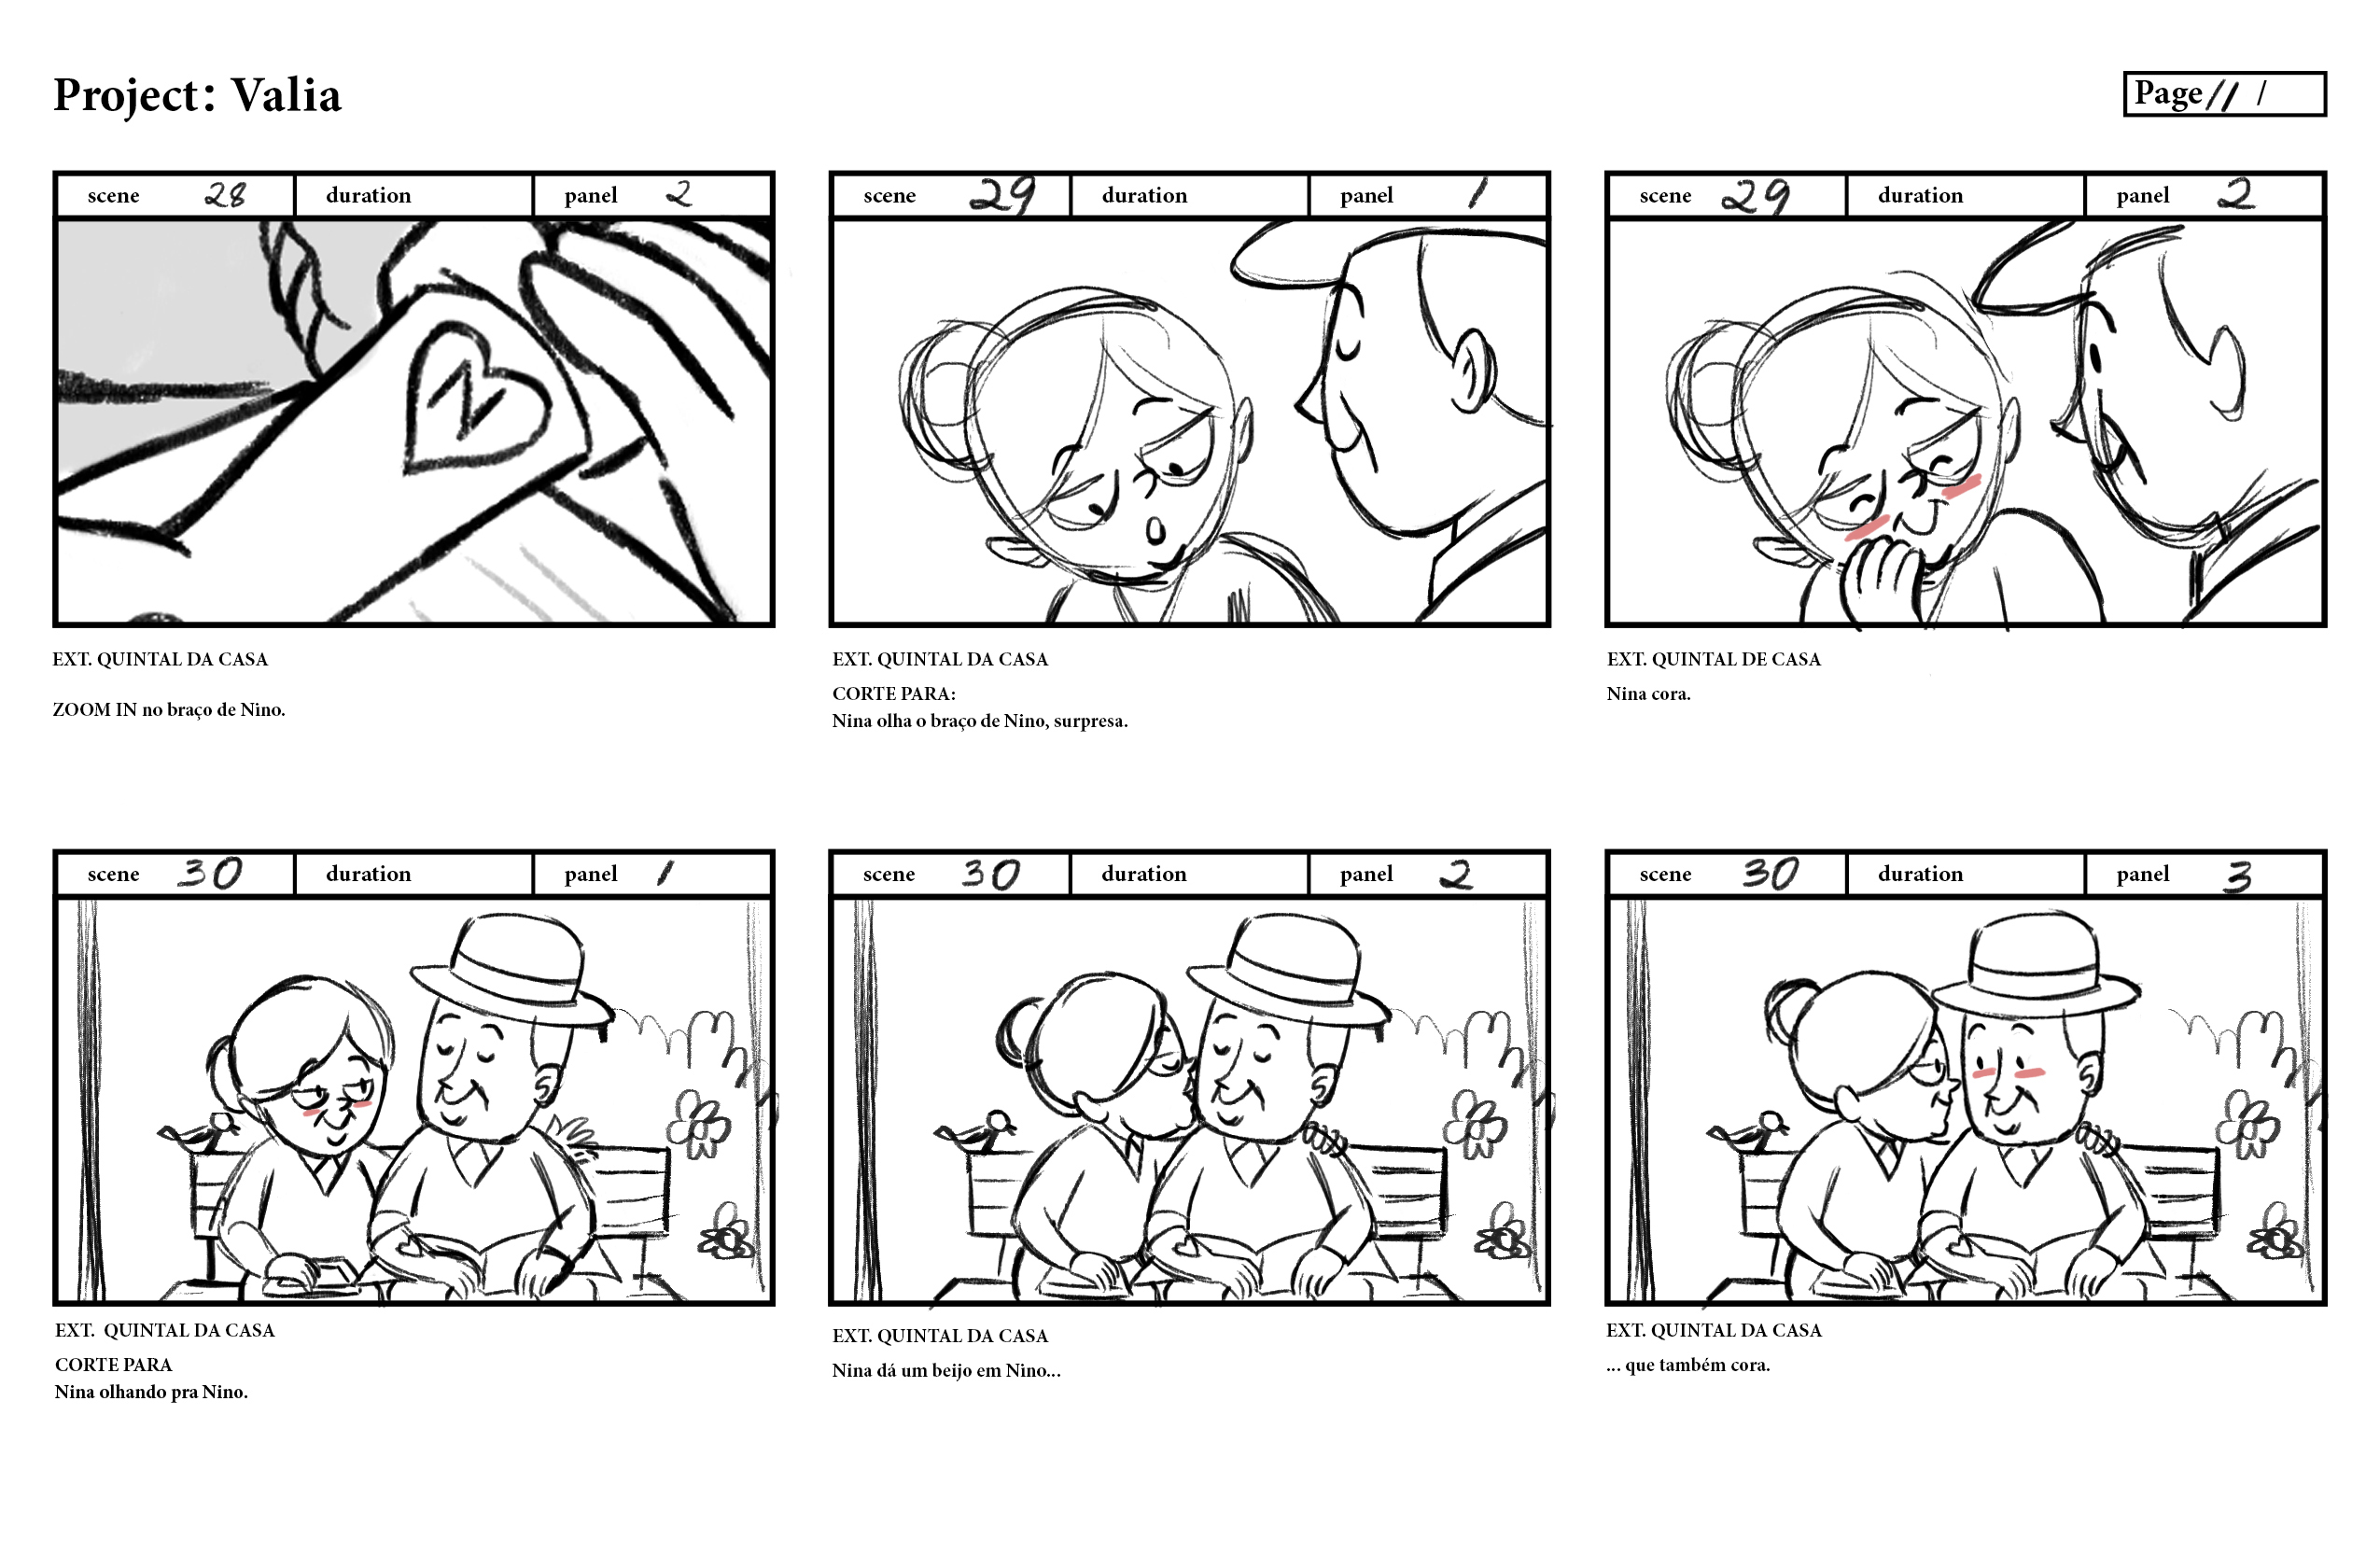 storyboard for a private insurance plan, to be animated with motion graphics